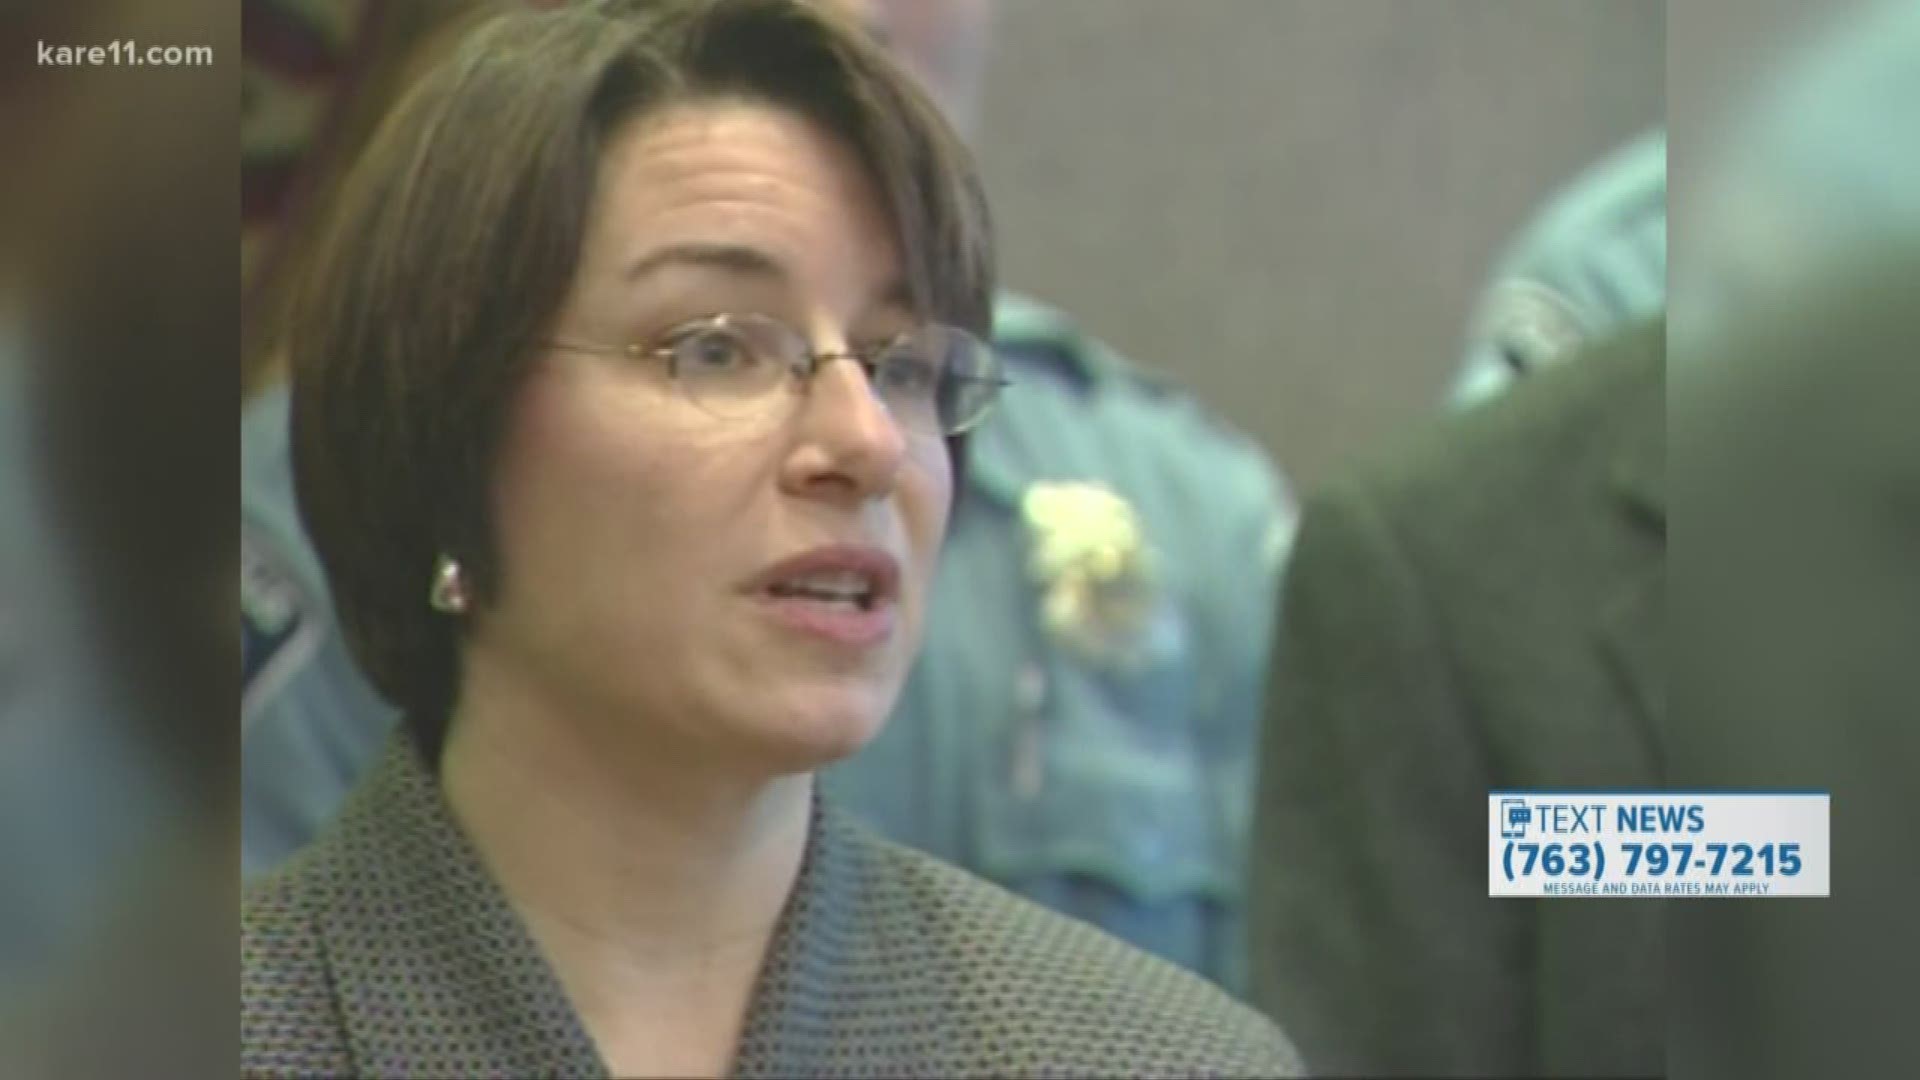 Freeman's office says the case is "being politicized" due to presidential candidate Amy Klobuchar's role as county attorney in the early 2000s.